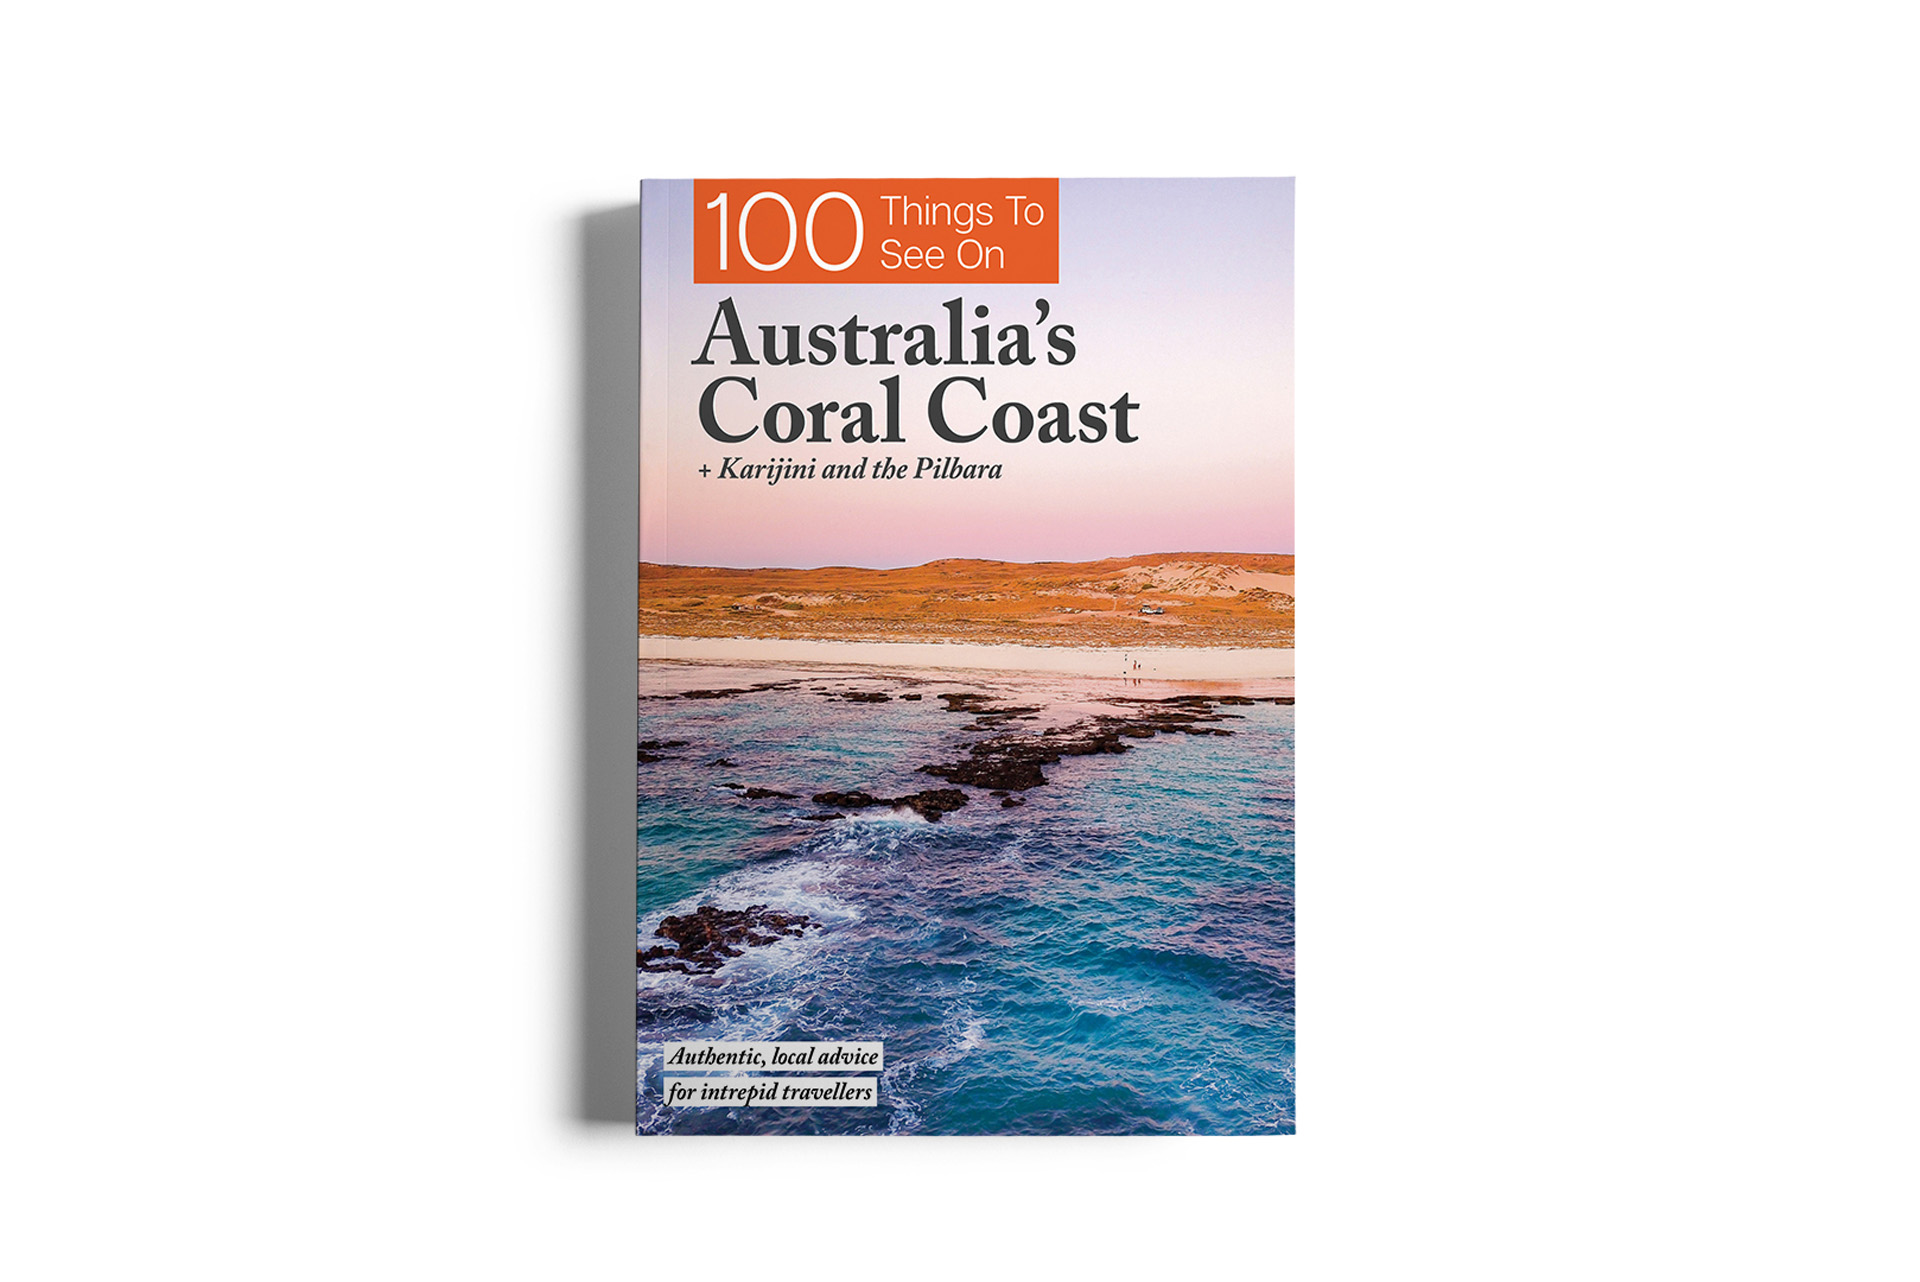 100 Things To See On Australia's Coral Coast